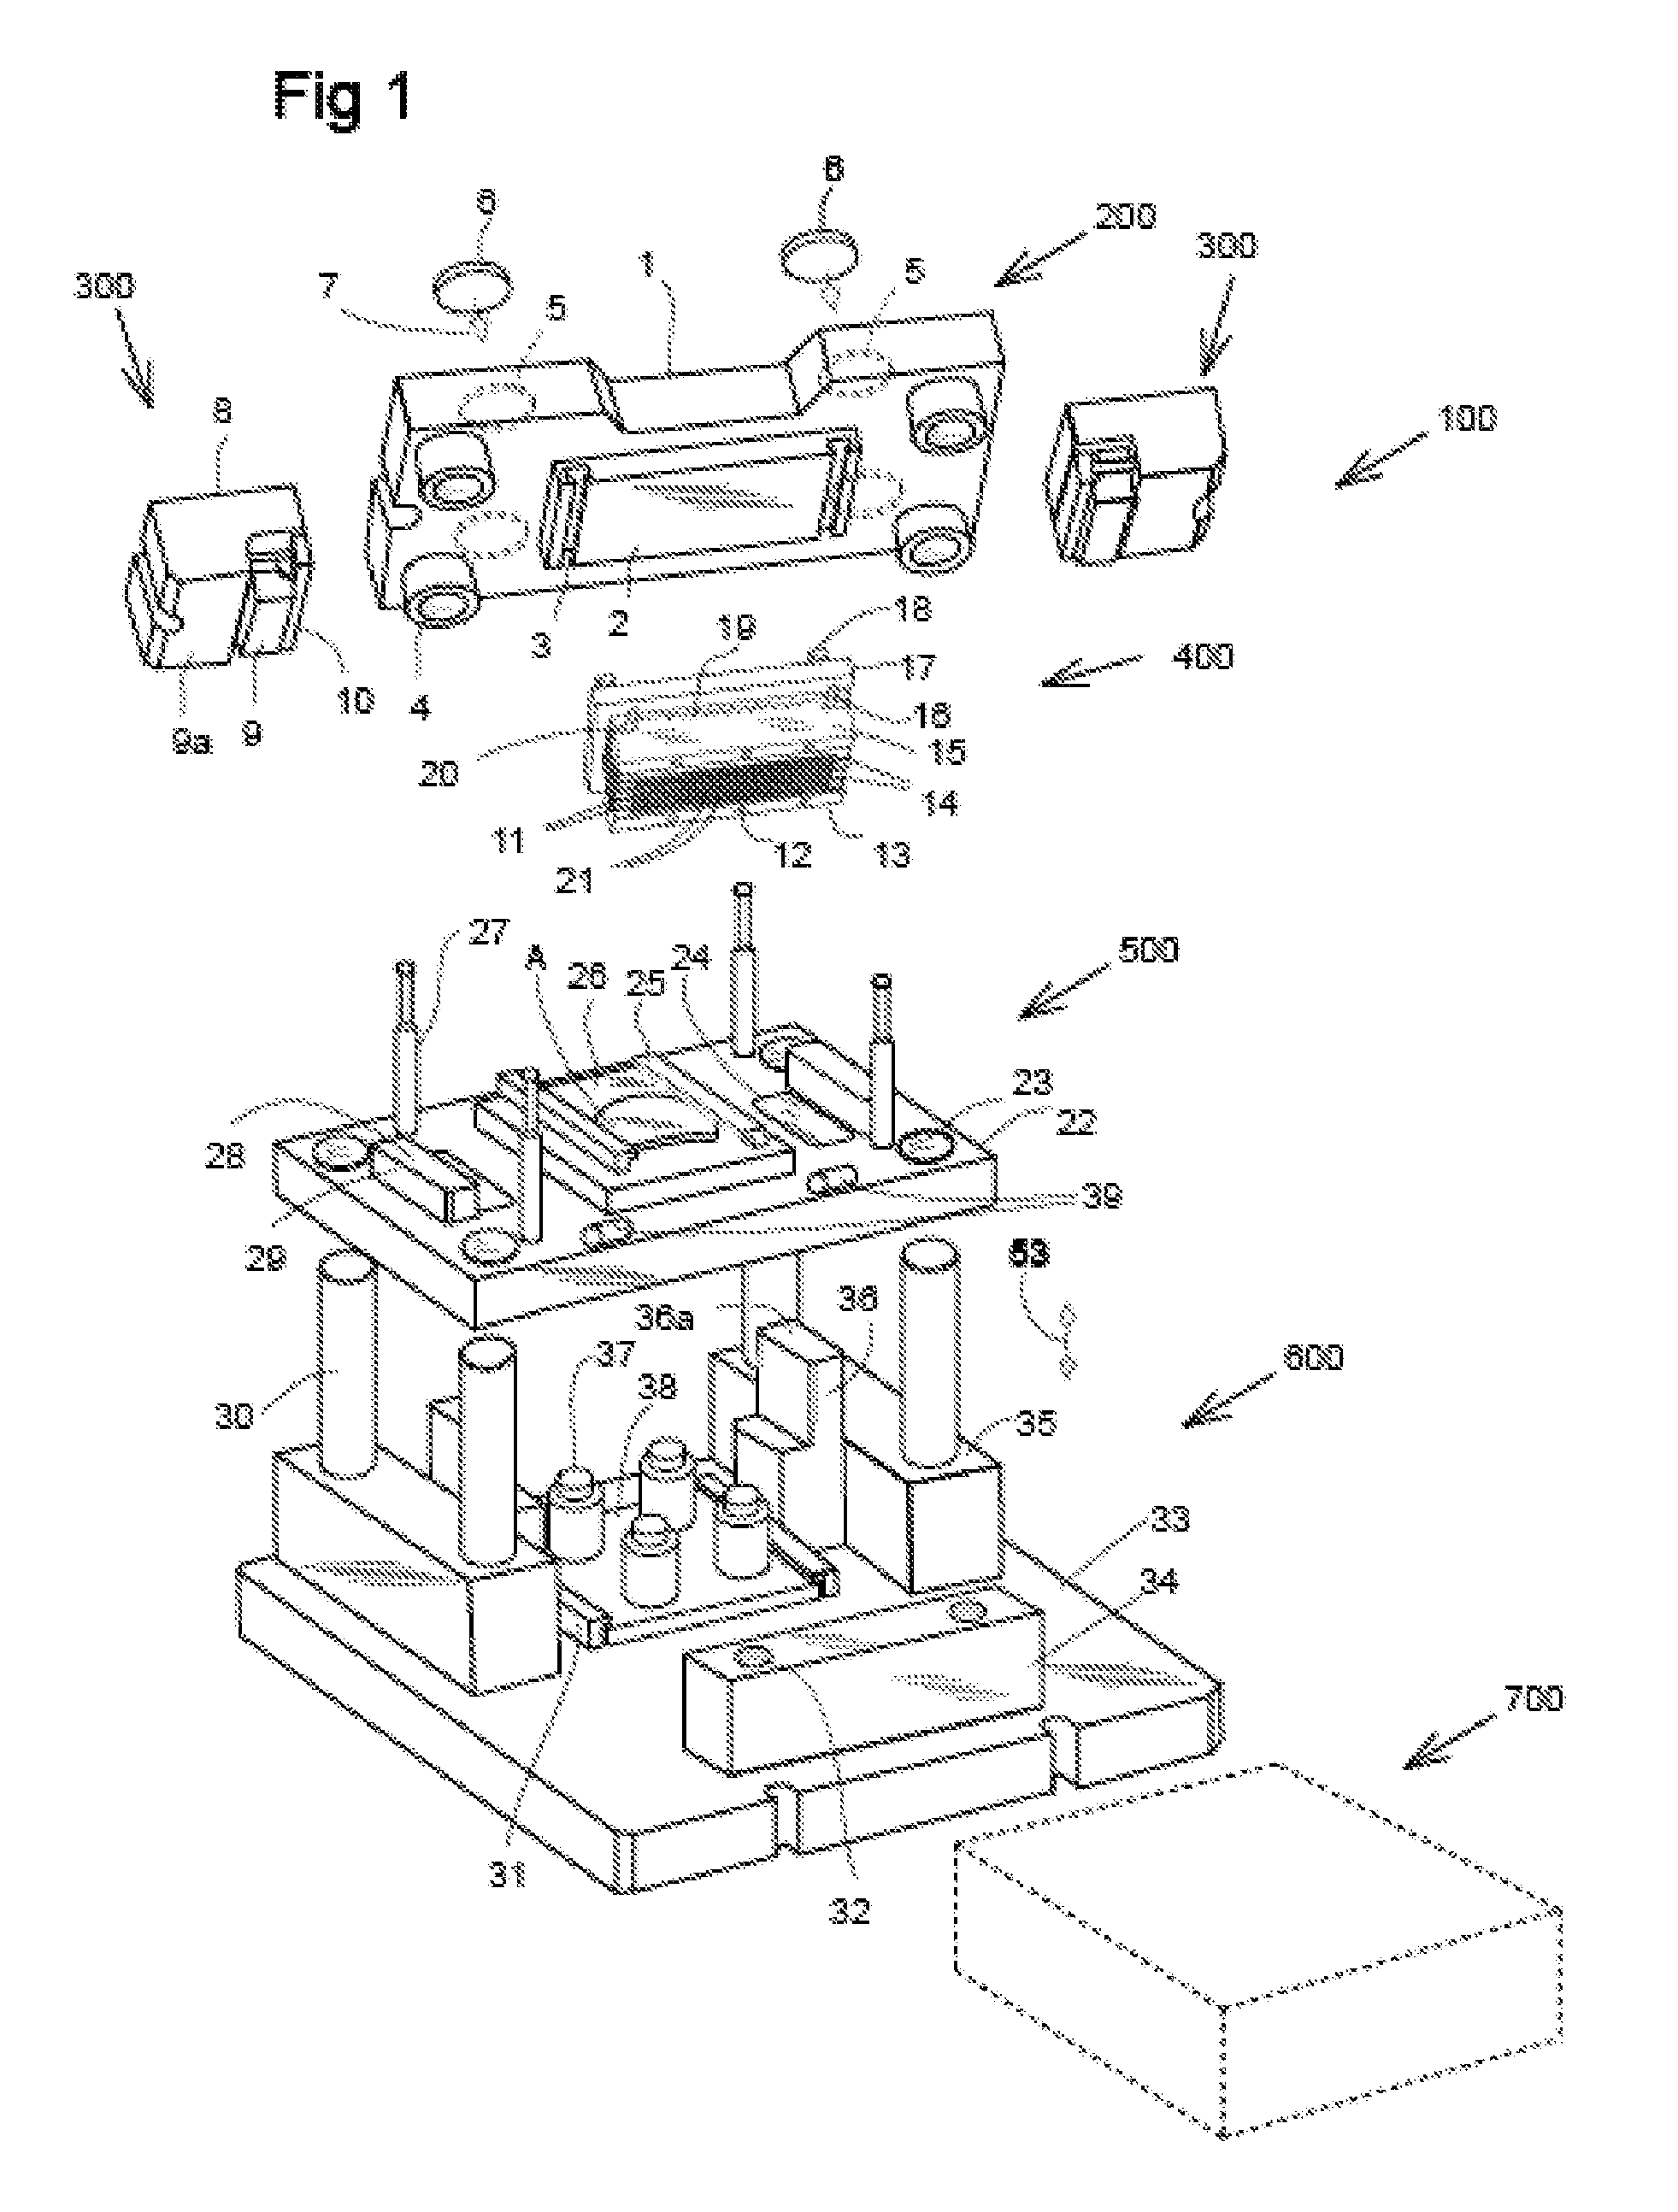 Apparatus for texturing the surface of a brake plate